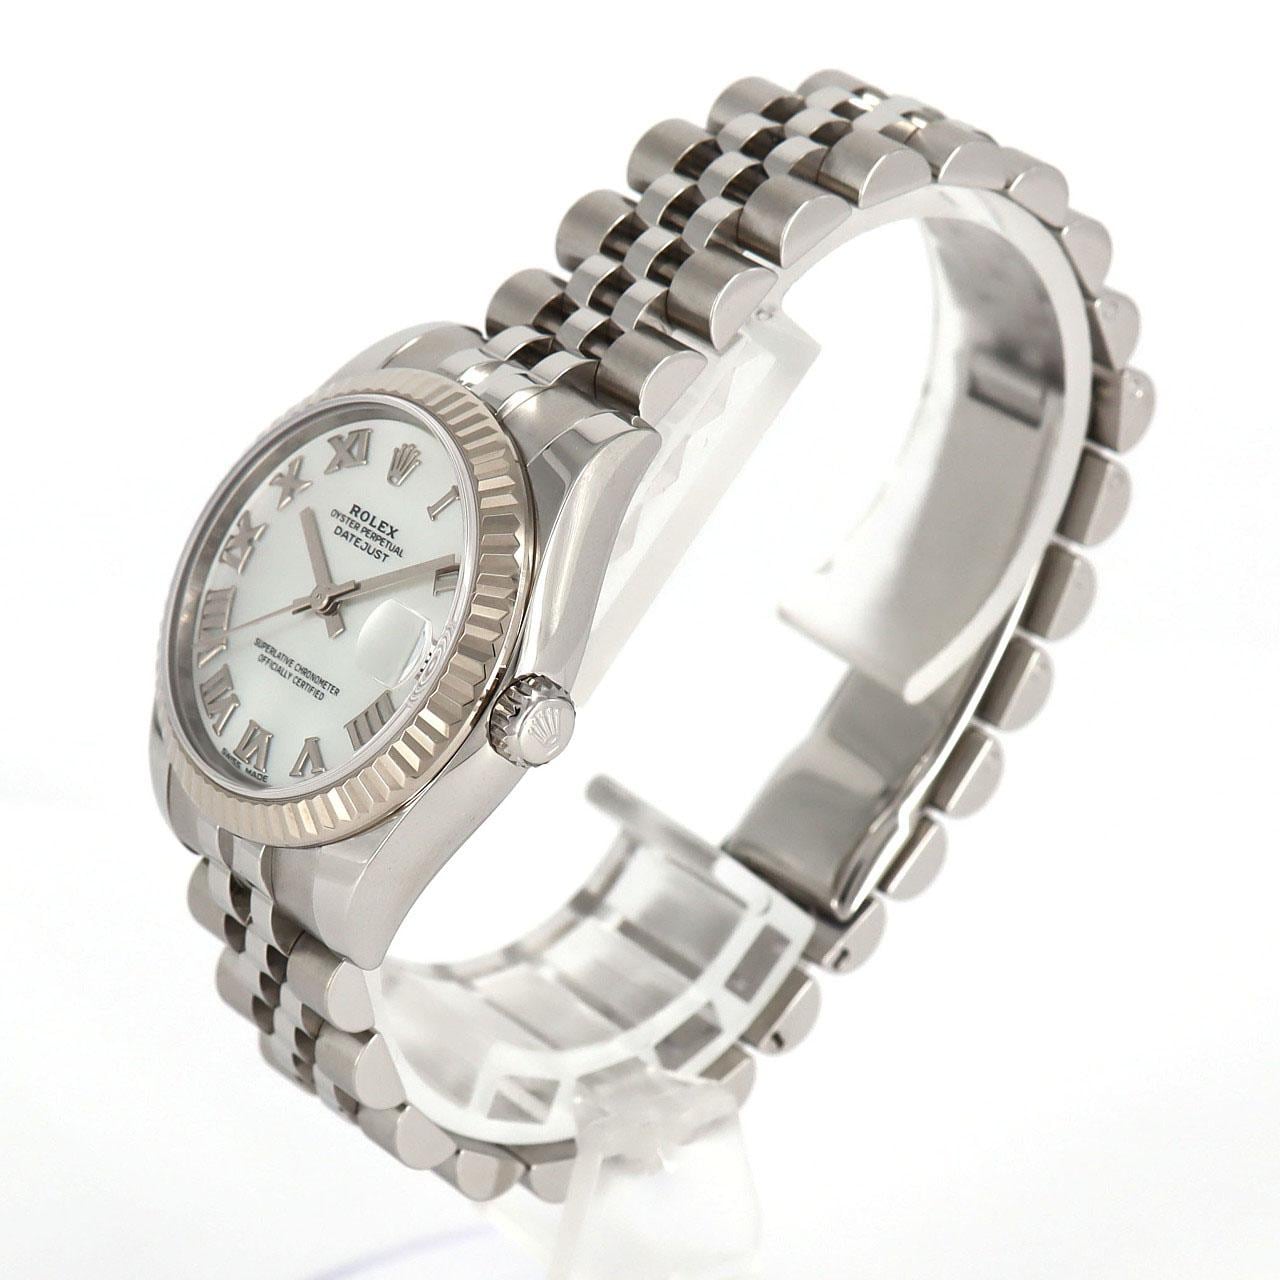 ROLEX Datejust 178274NR SSxWG Automatic random number